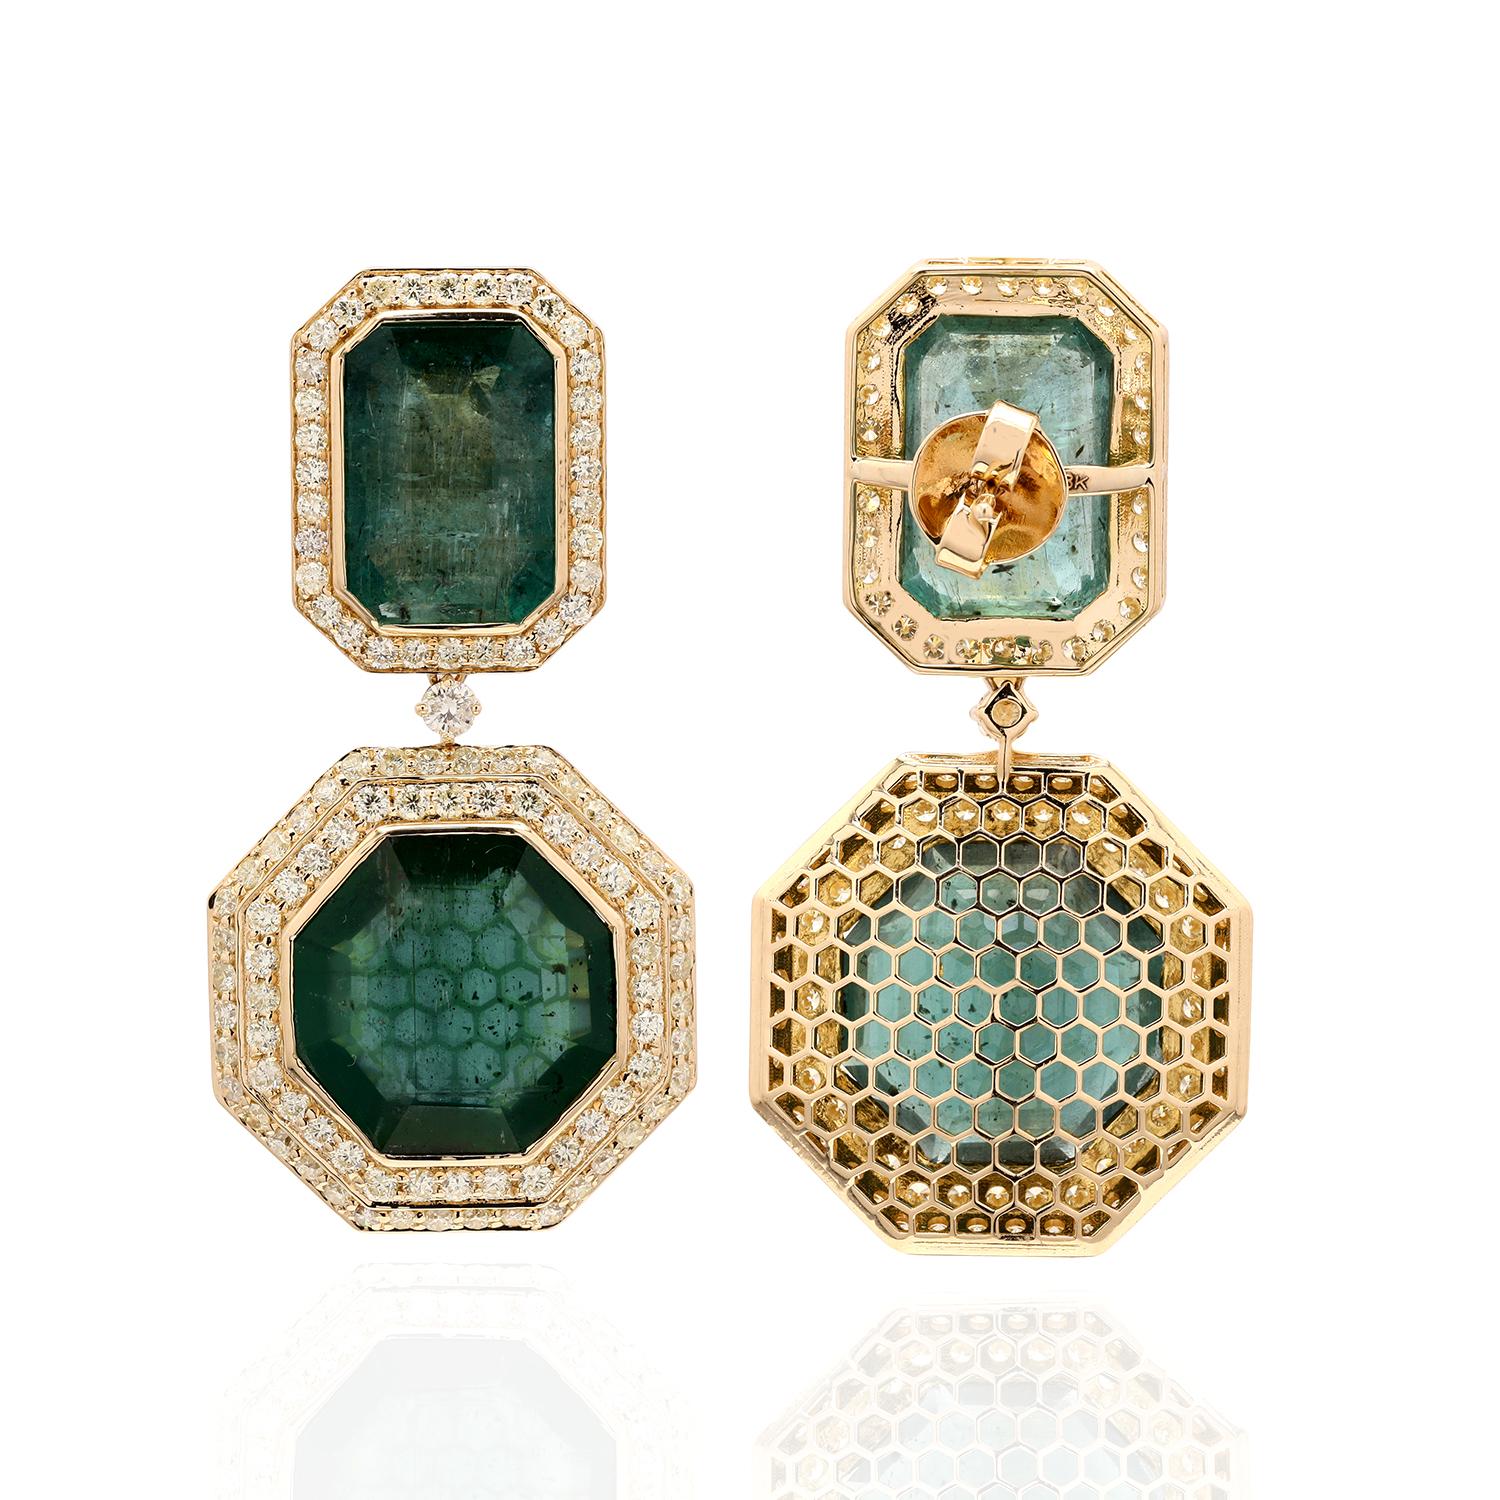 Contemporary 41.22 ct Two Tier Emerald Dangle Earrings With Diamonds Made in 18k Yellow Gold For Sale